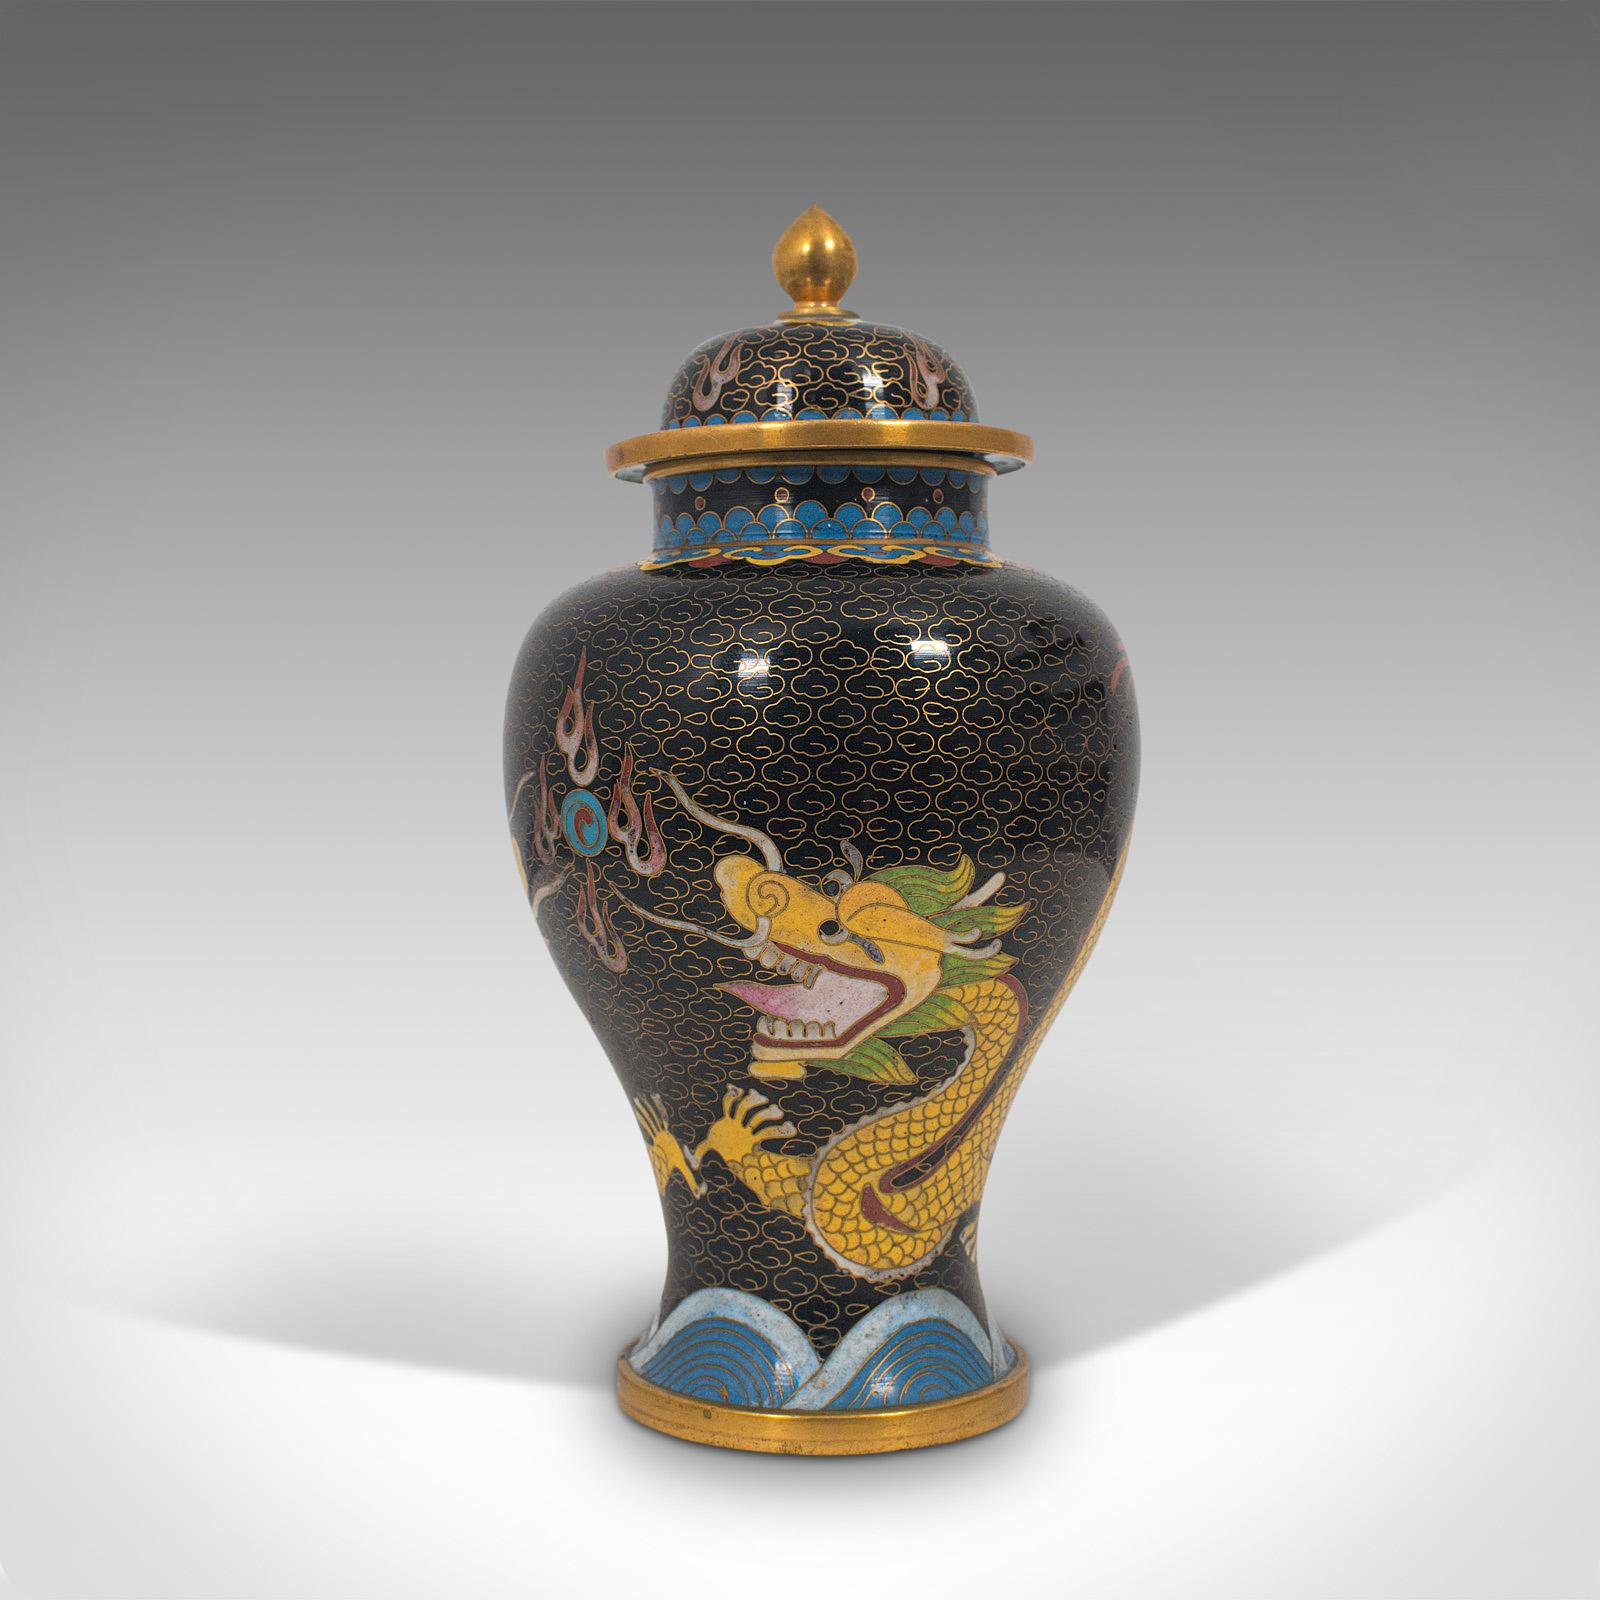 Antique Decorative Spice Jars, Chinese, Cloisonné, Baluster Urn circa 1900, Pair For Sale 3